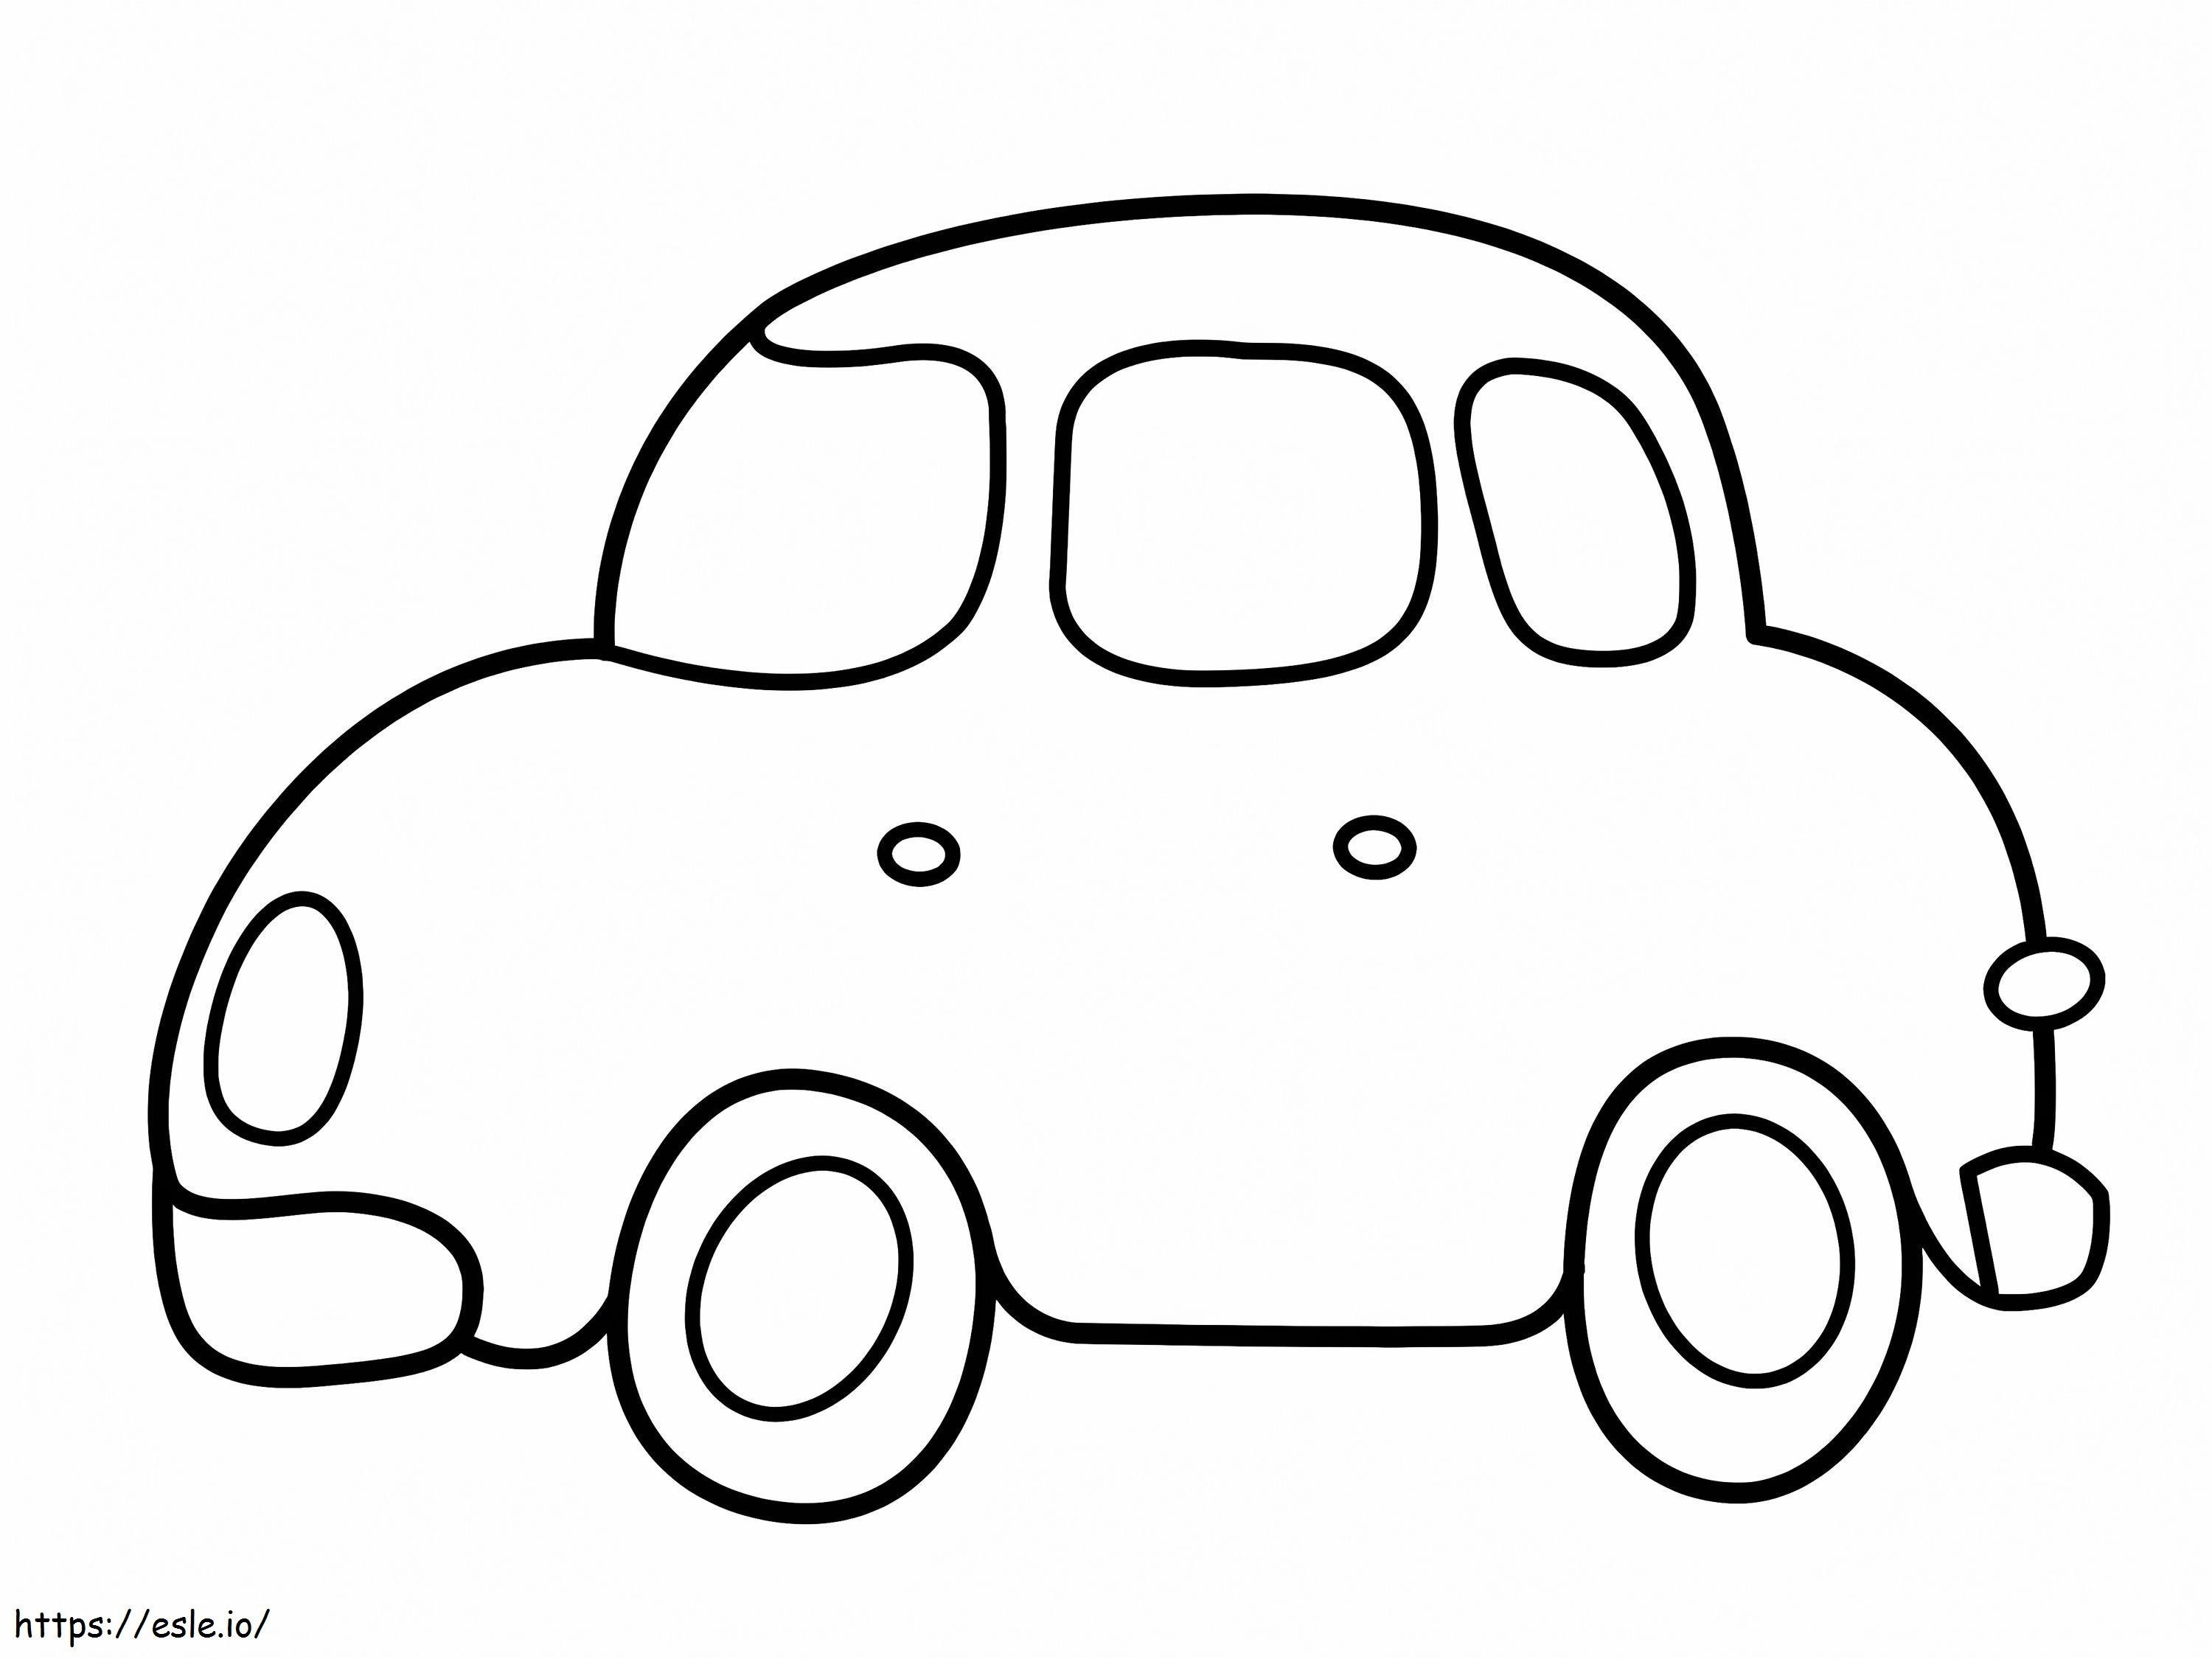 Very Easy Car coloring page